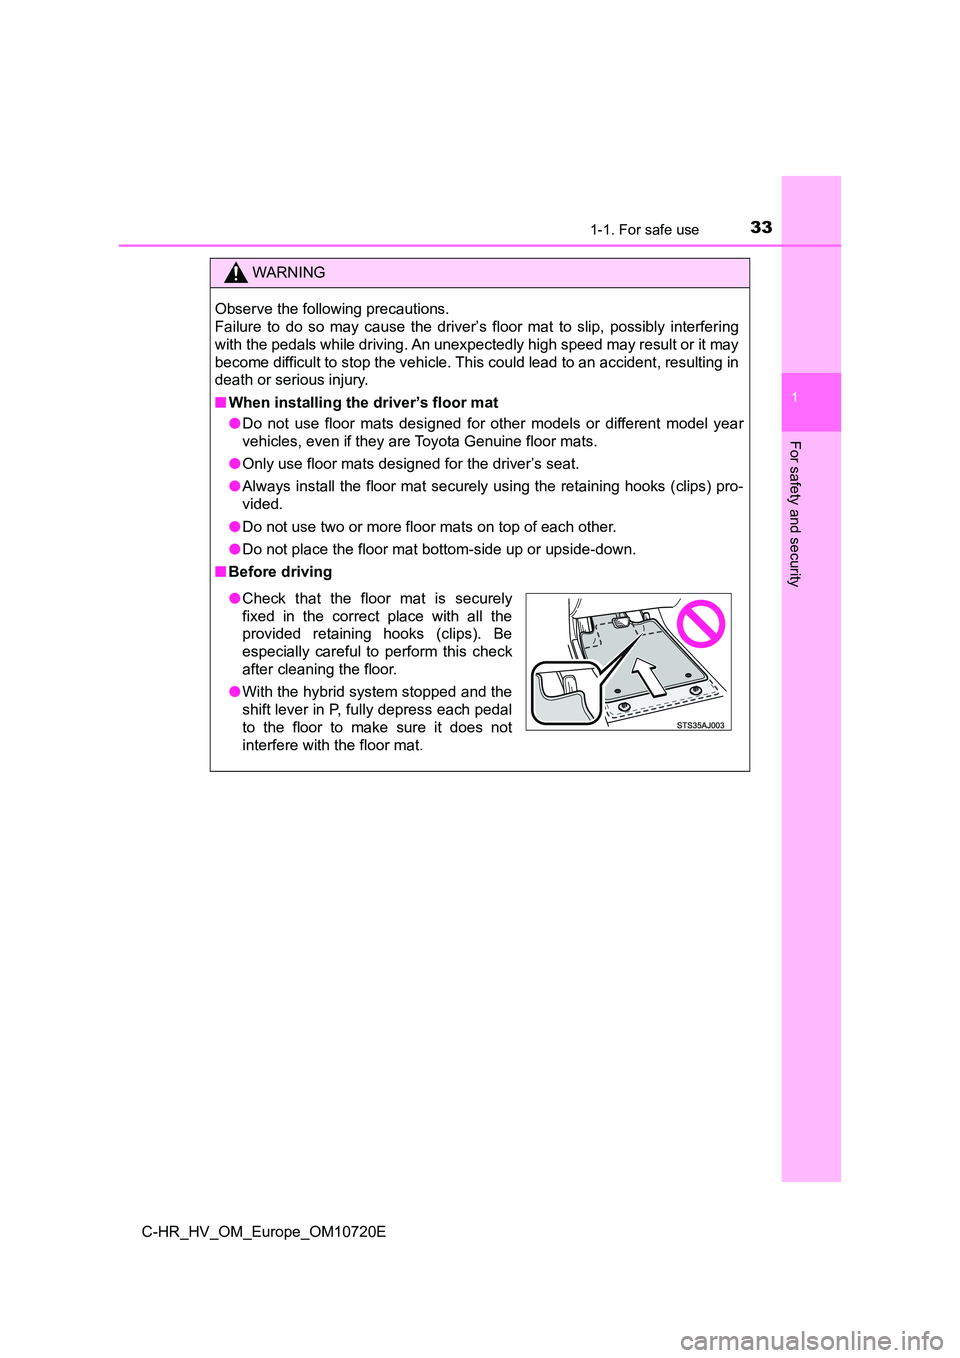 TOYOTA C-HR 2022  Owners Manual 331-1. For safe use
1
For safety and security
C-HR_HV_OM_Europe_OM10720E
WARNING
Observe the following precautions.  
Failure  to  do  so  may  cause  the  driver’s  floor  mat  to  slip,  poss ibly